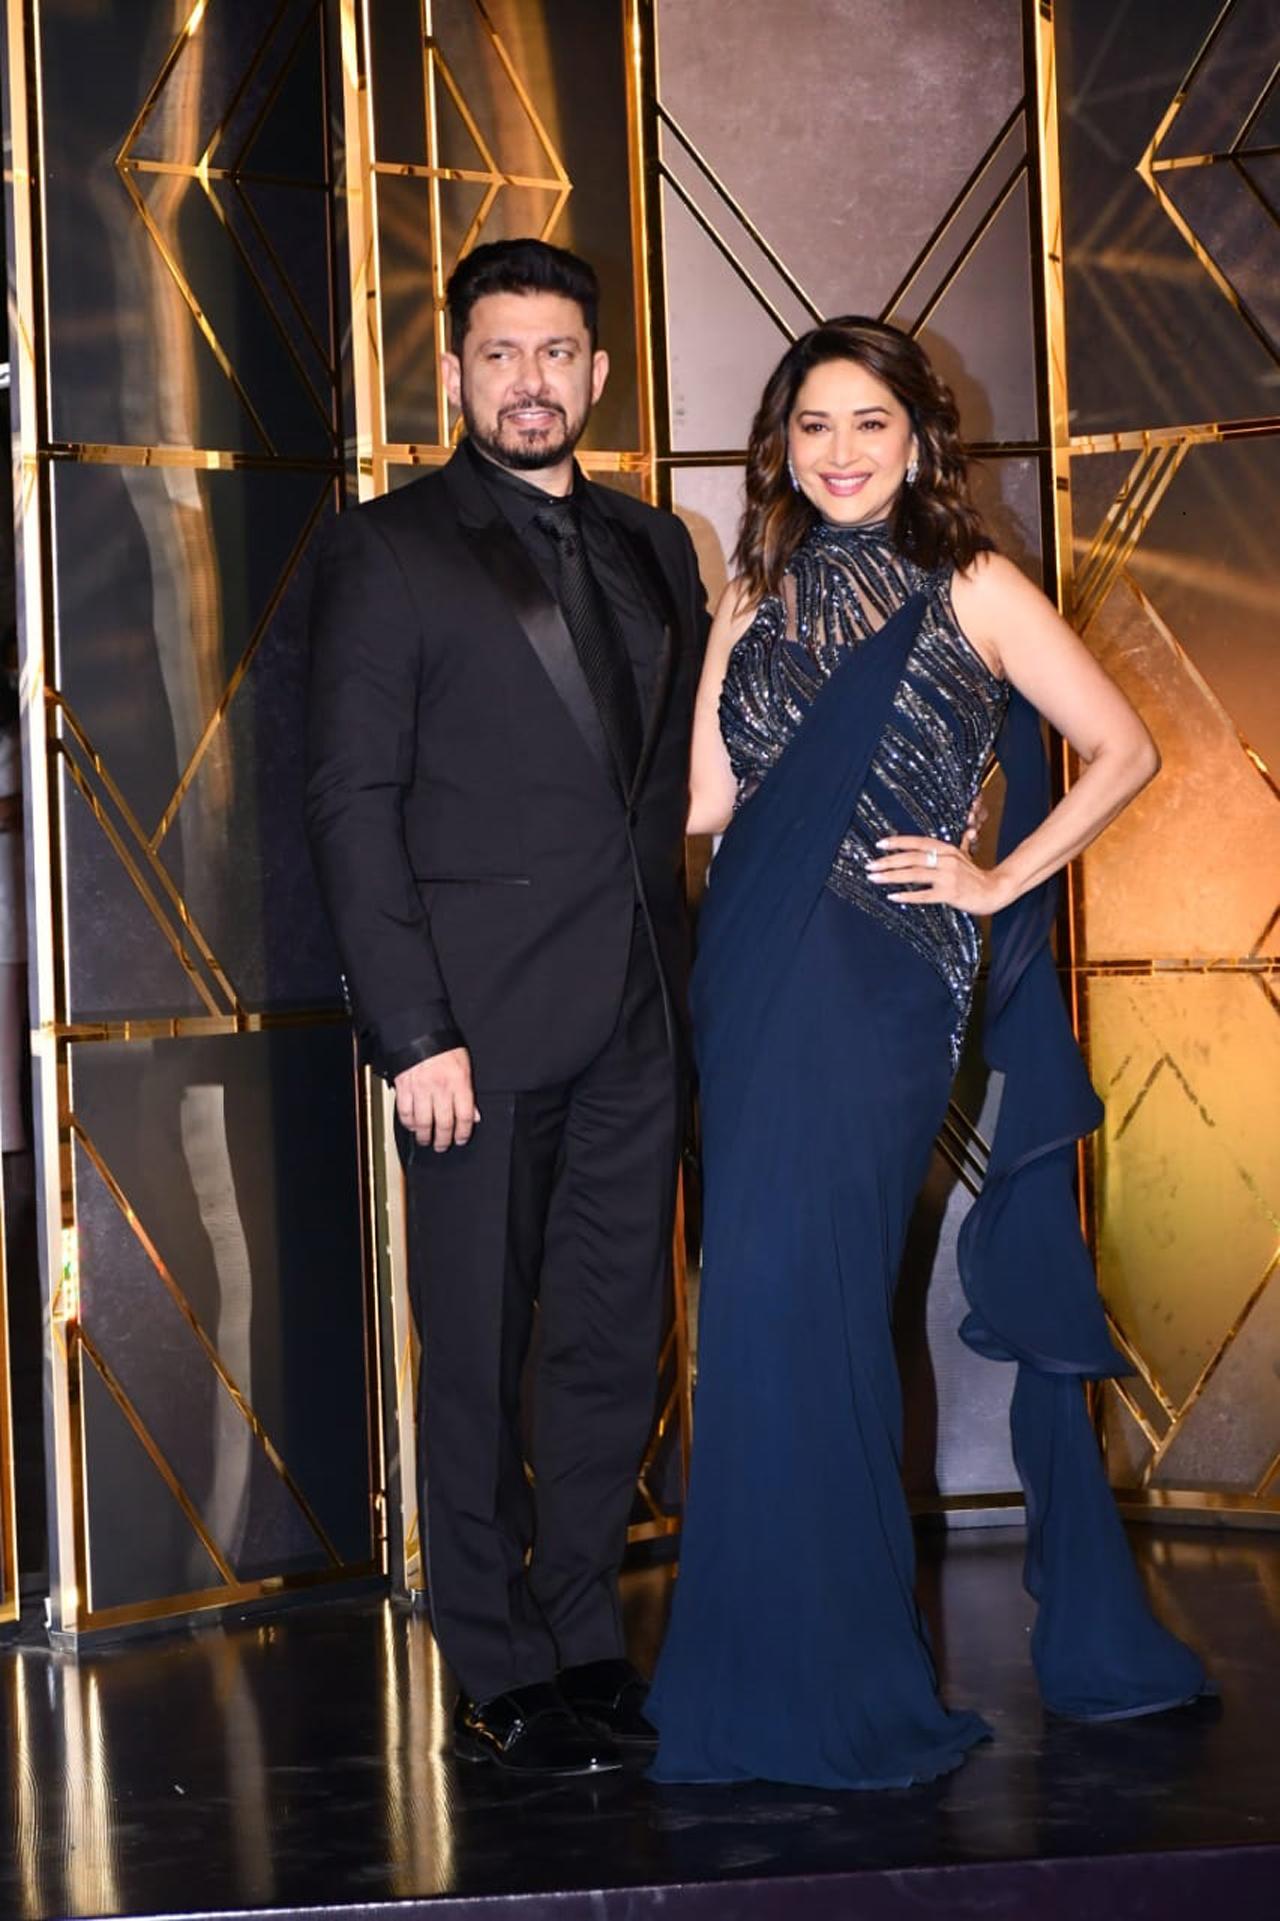 Madhuri Dixit attended the party with her husband Sriram Nene. Tho due showed off their ethereal side as they posed for the shutterbugs together.